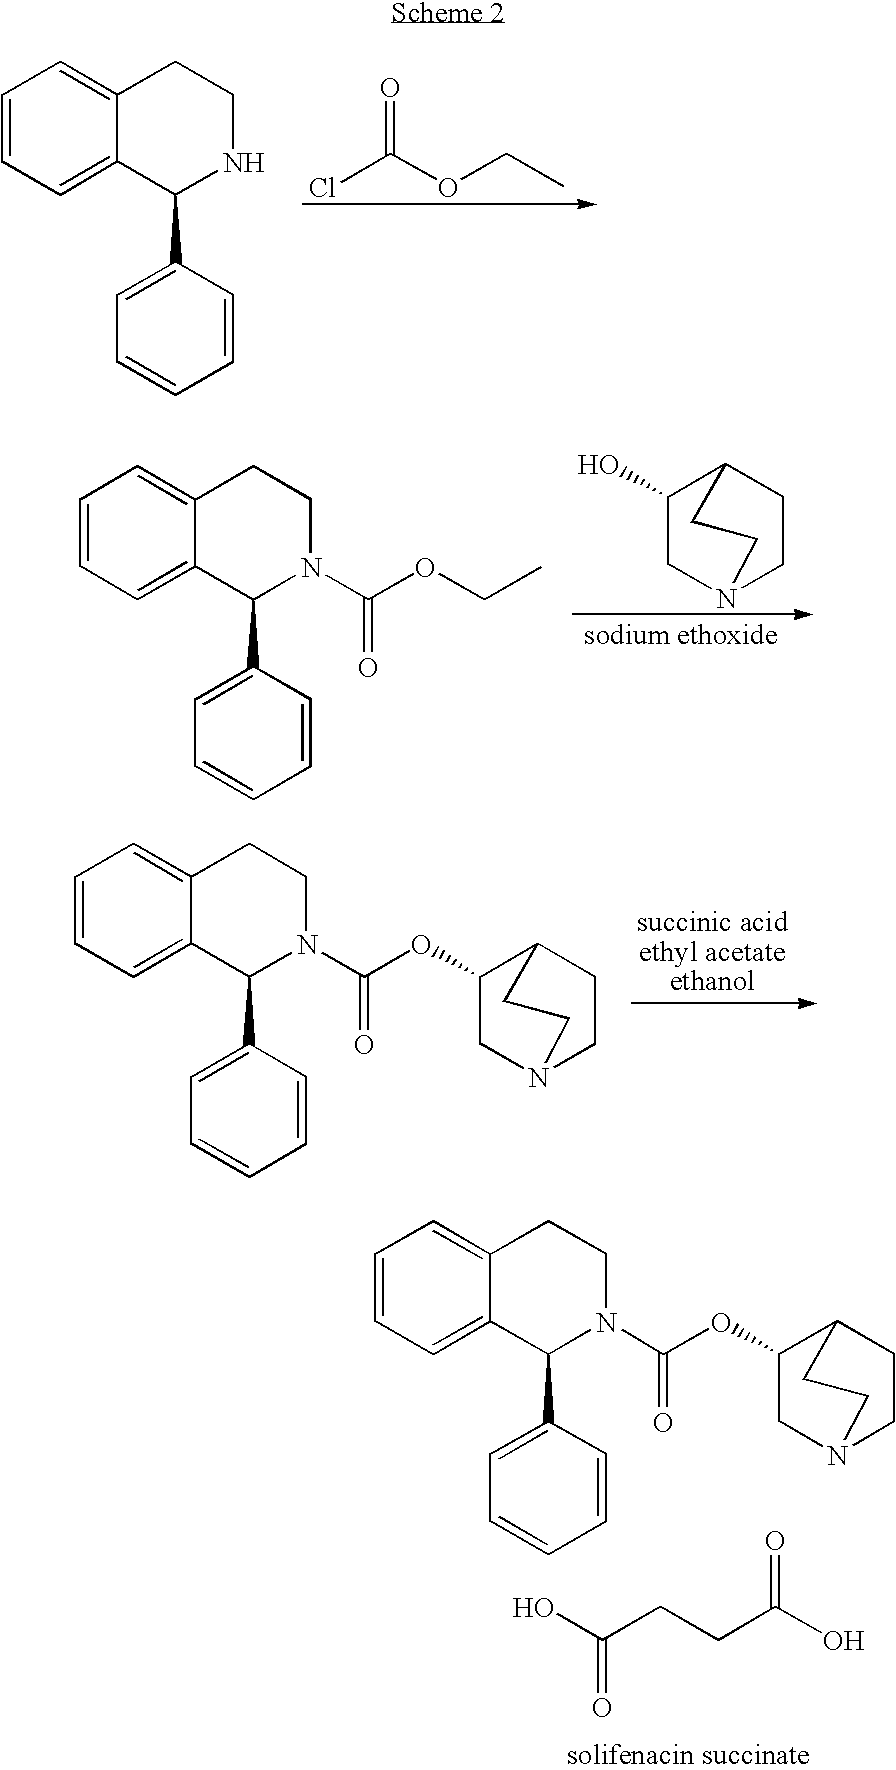 Process for the synthesis of solifenacin